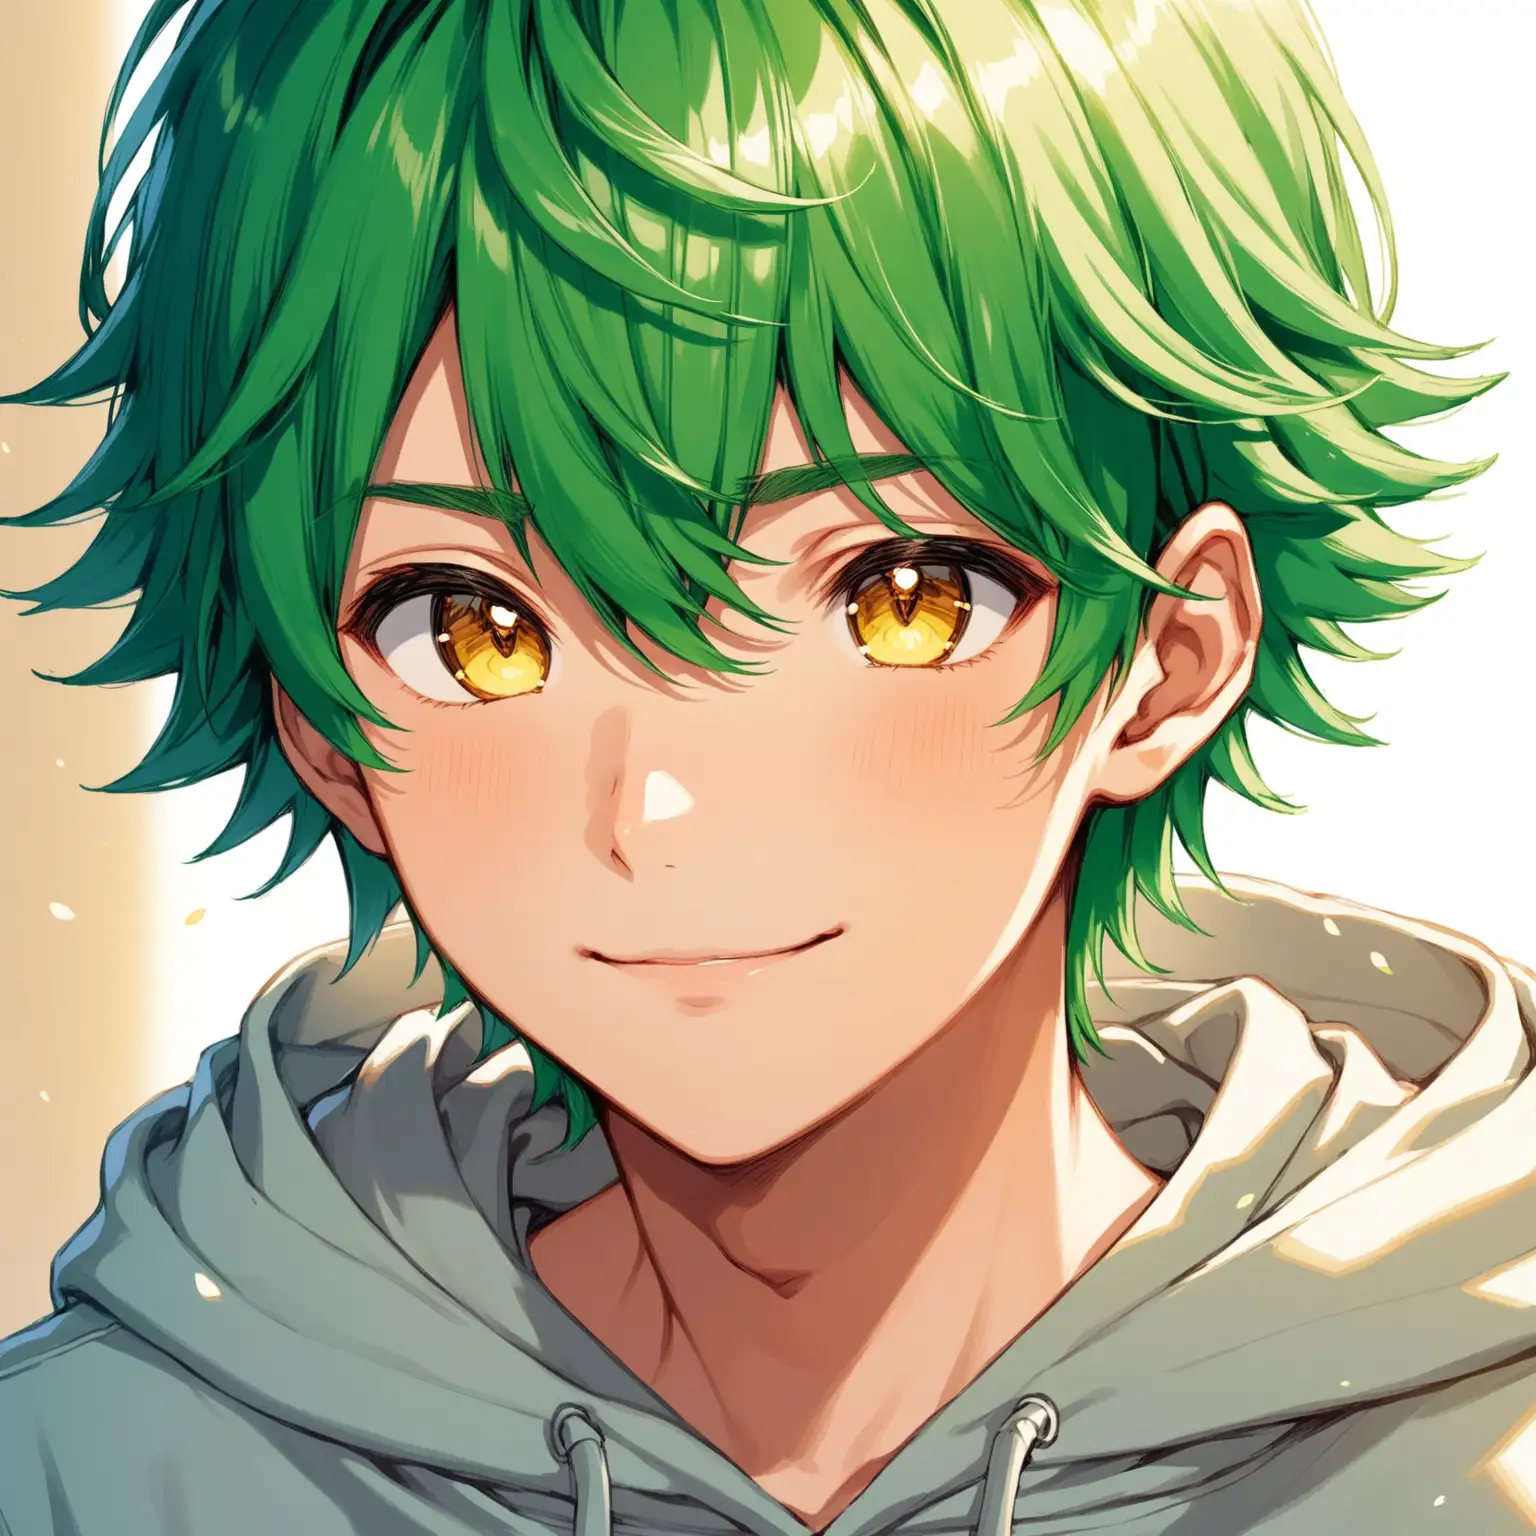 CloseUp of Cute Anime Boy with Wavy Green Hair and Hoodie Smiling